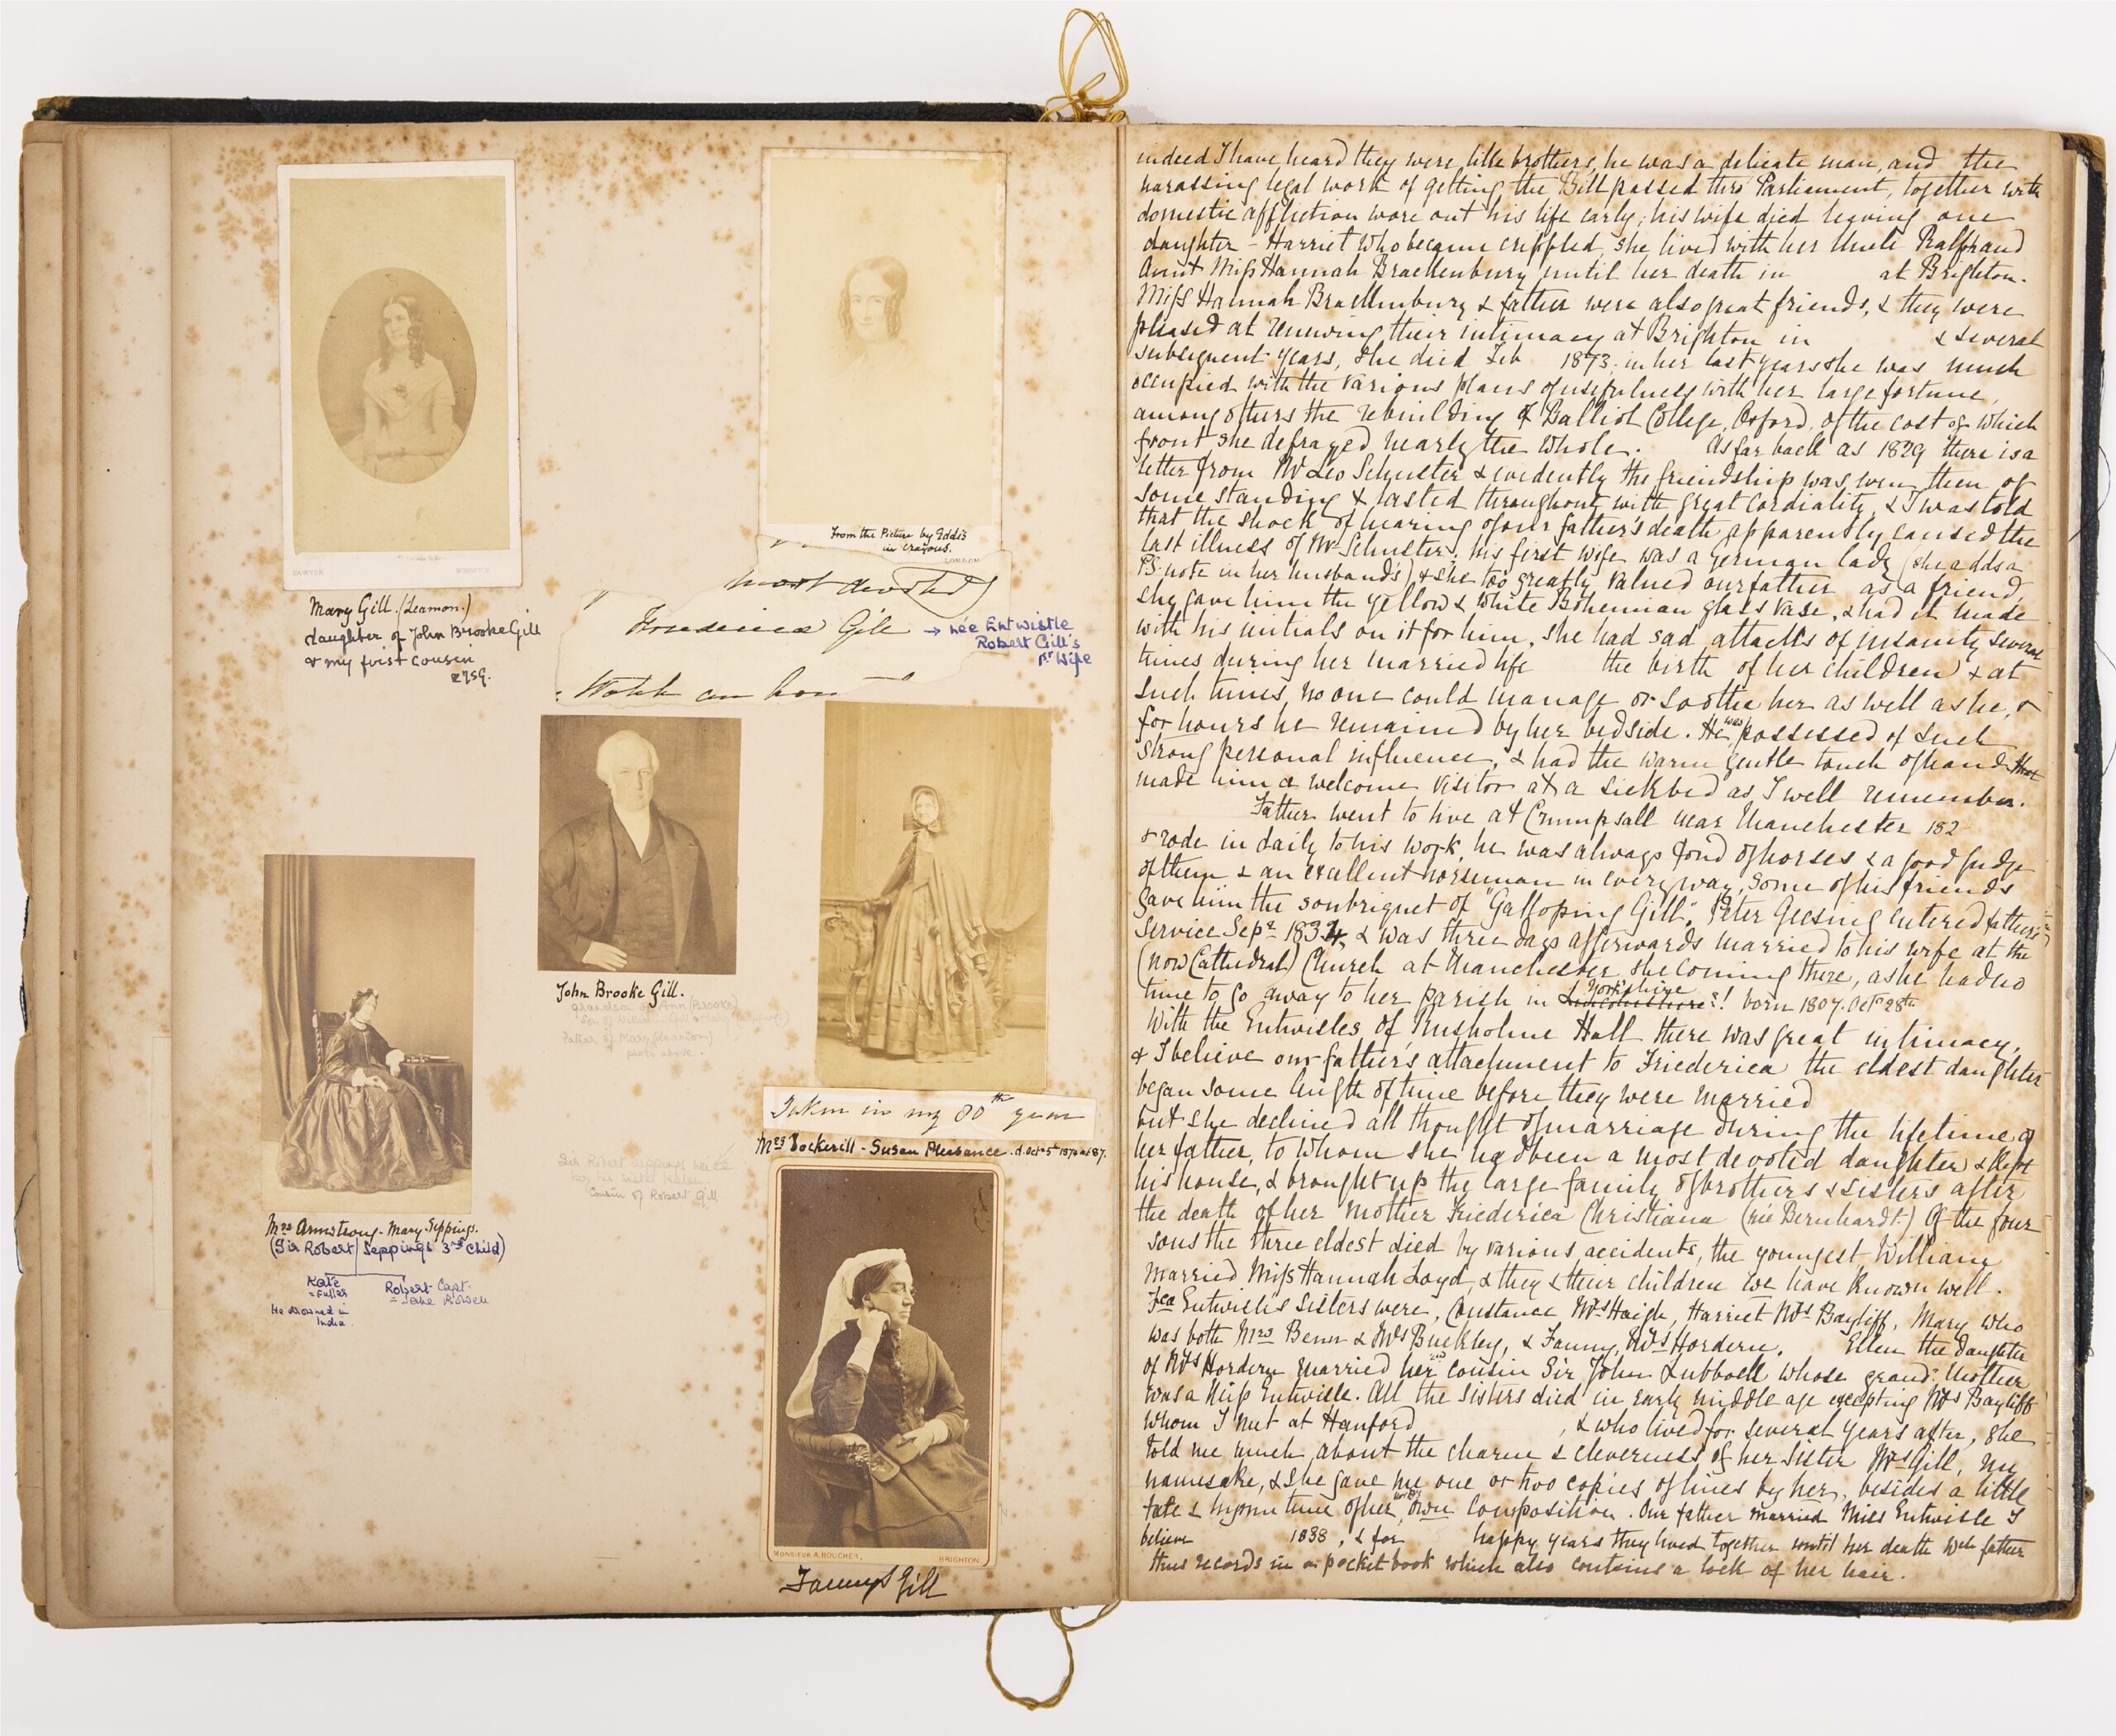 Some pages of the 'Memorials of Robert Gill', 1889, containing images of various family members on the left and a hand-written account of Robert's life on the right.